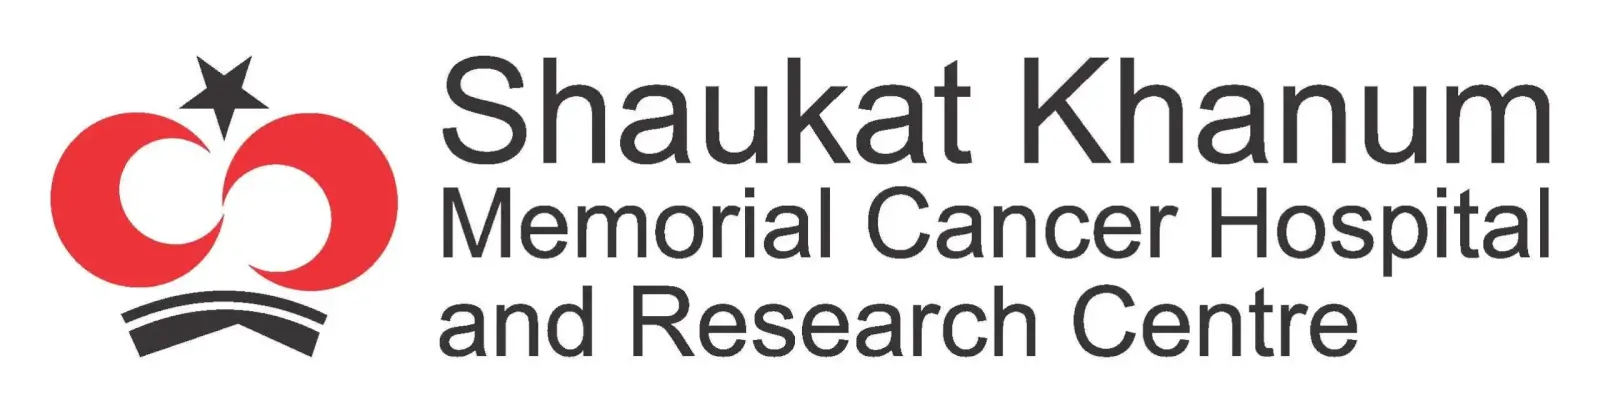 Spotlighting South Asian NGOs: Catalysts for Global Change - Shaukat Khanum Memorial Cancer Hospital & Research Centre.